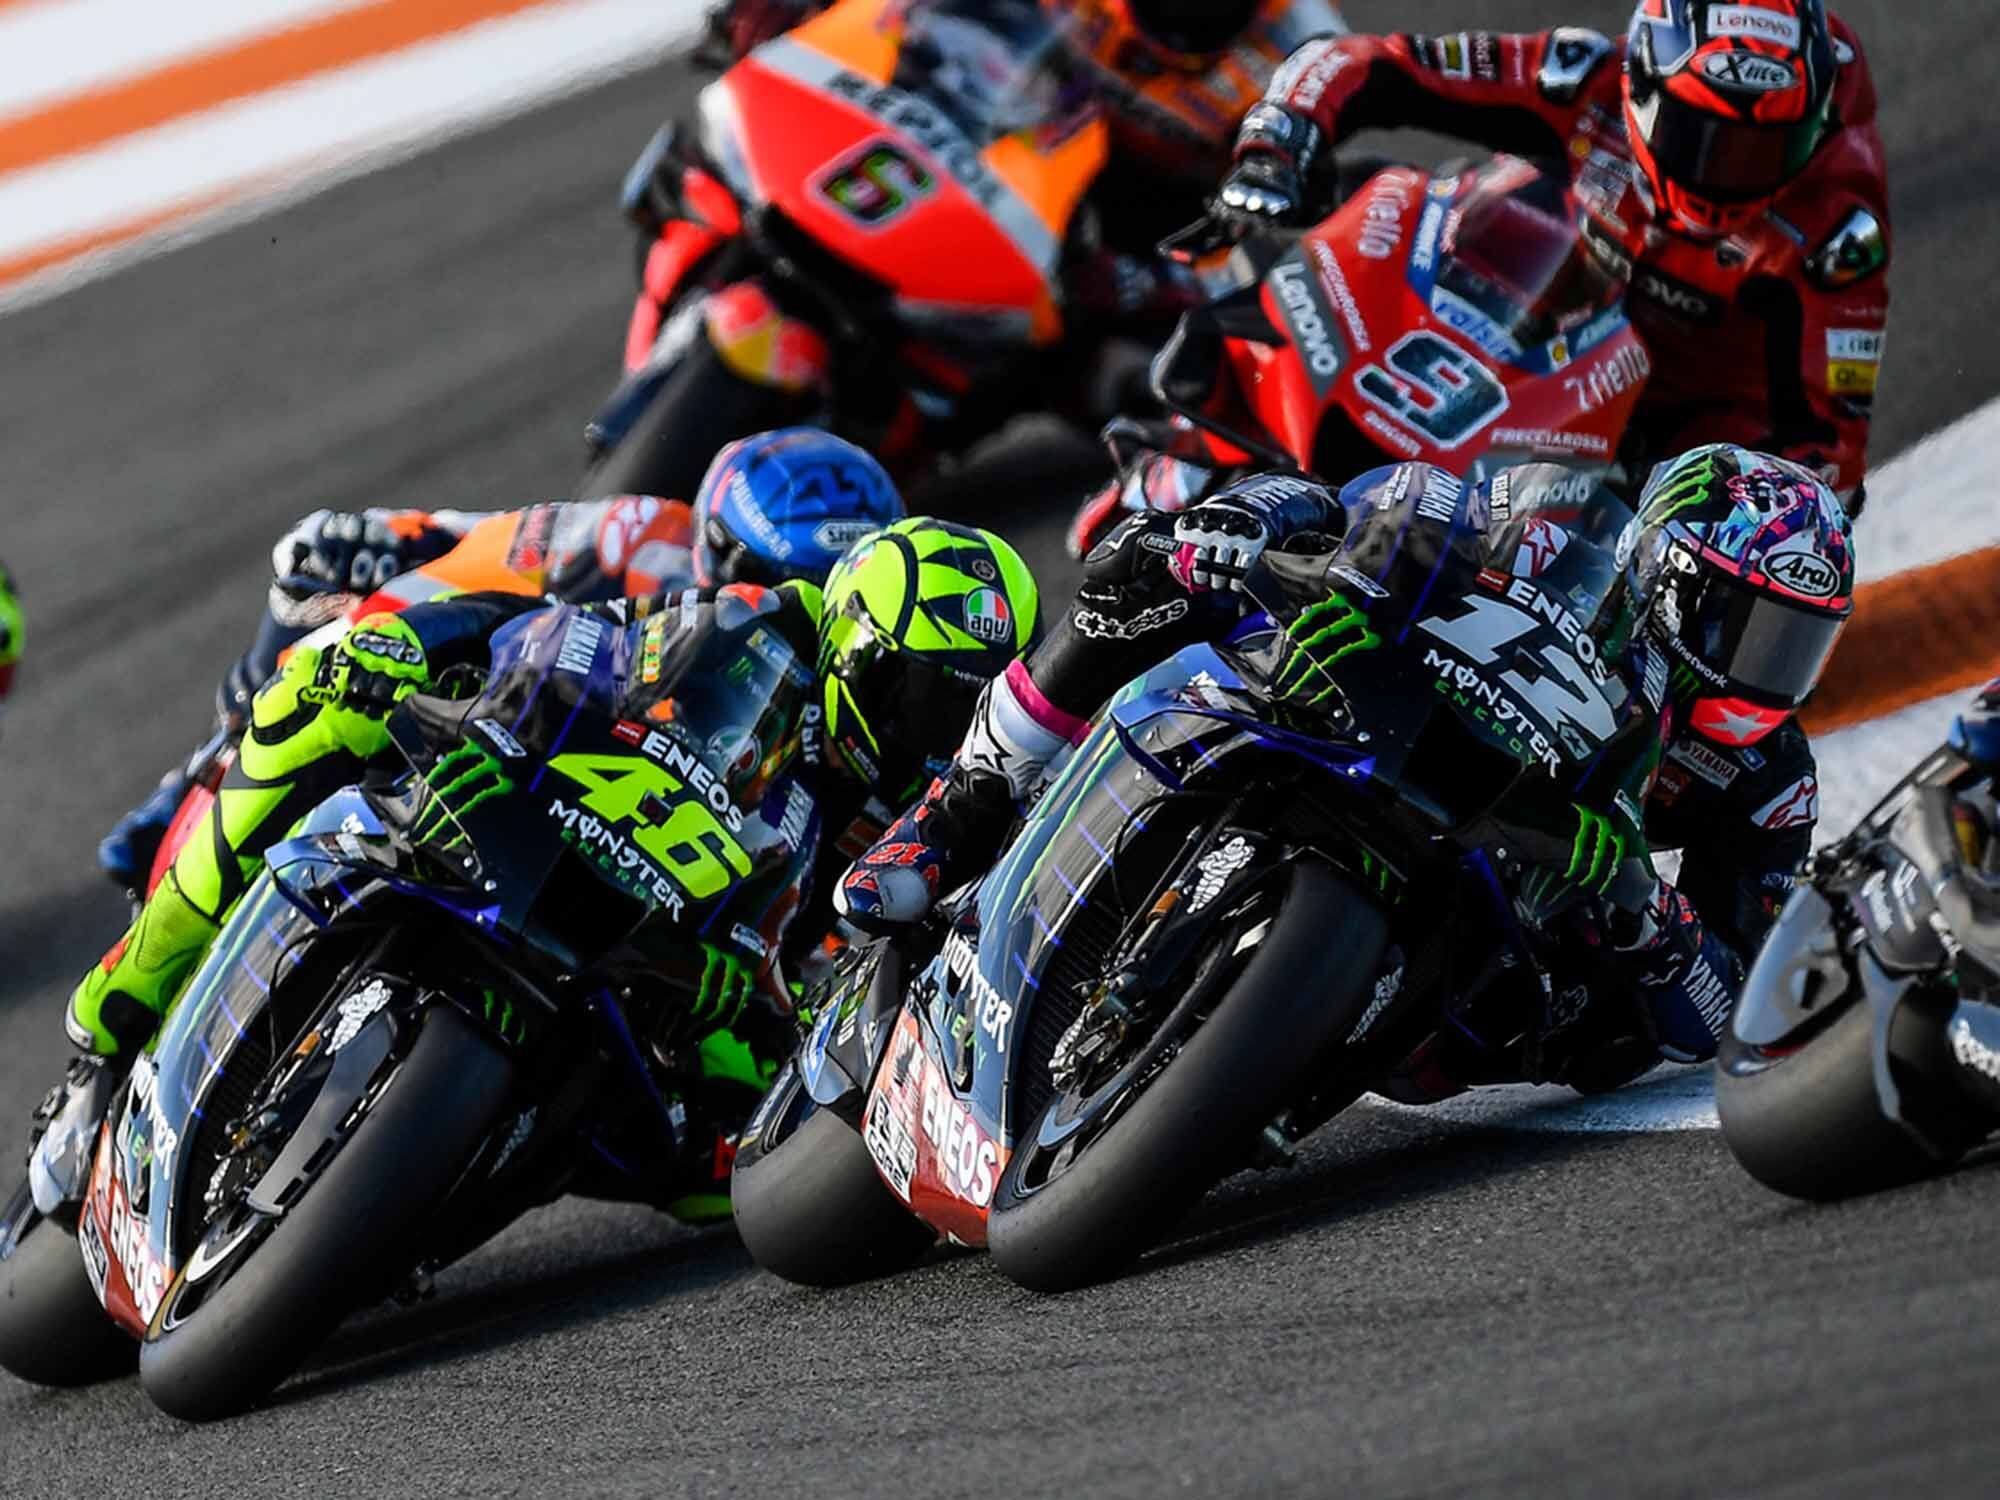 Valentino Rossi (46) was still trying to find his post-COVID-19 footing and finished 12th, while teammate Maverick Viñales (12) finished 10th.